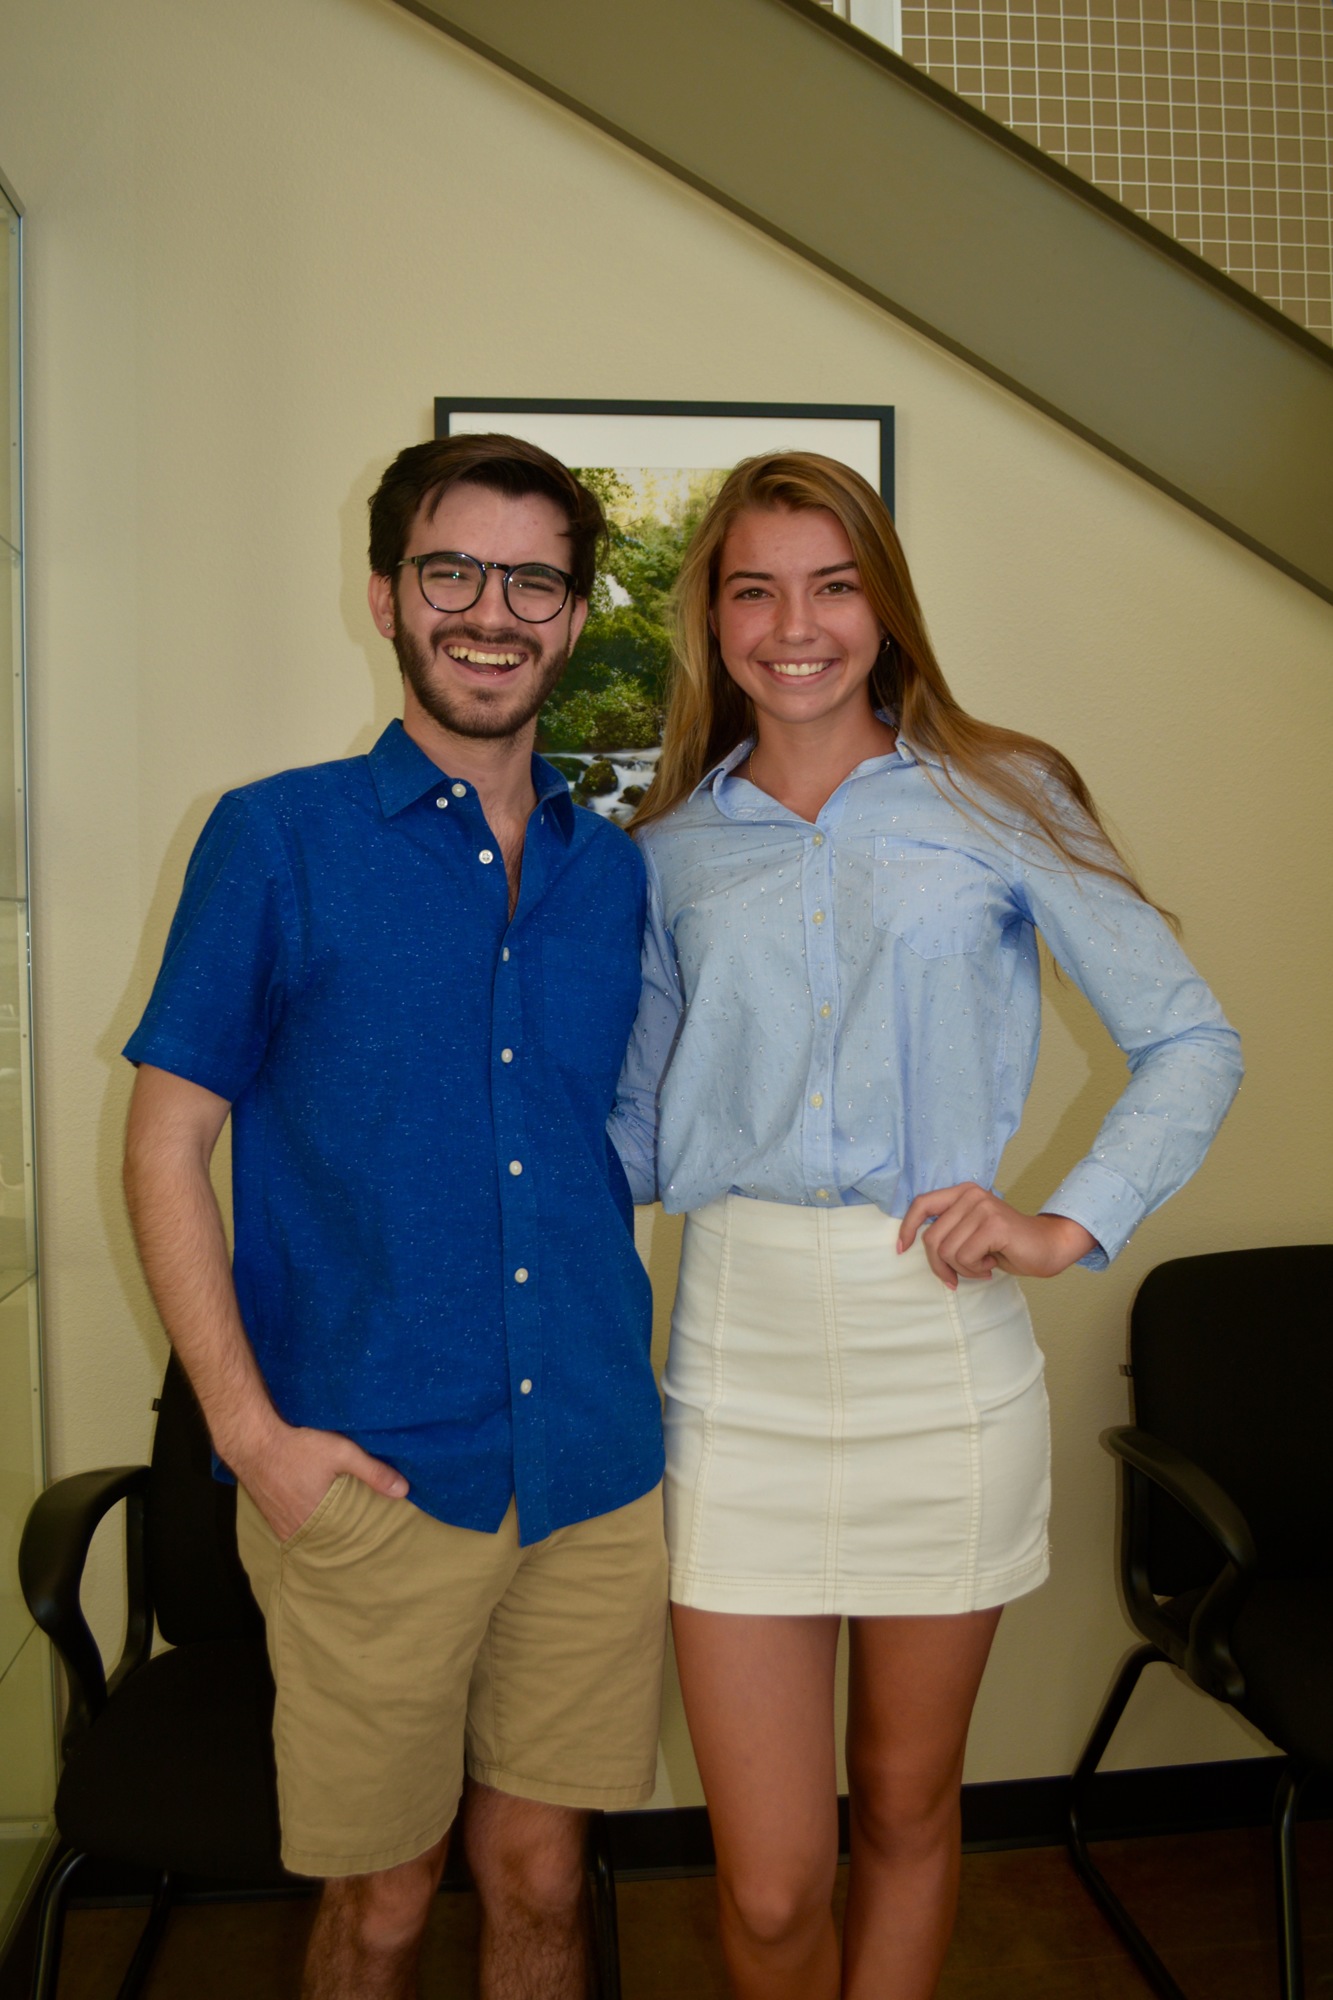 Dante Garcia and Taylor Sawyer are seniors at Sarasota High School who will be completing the Cambridge AICE program this year.